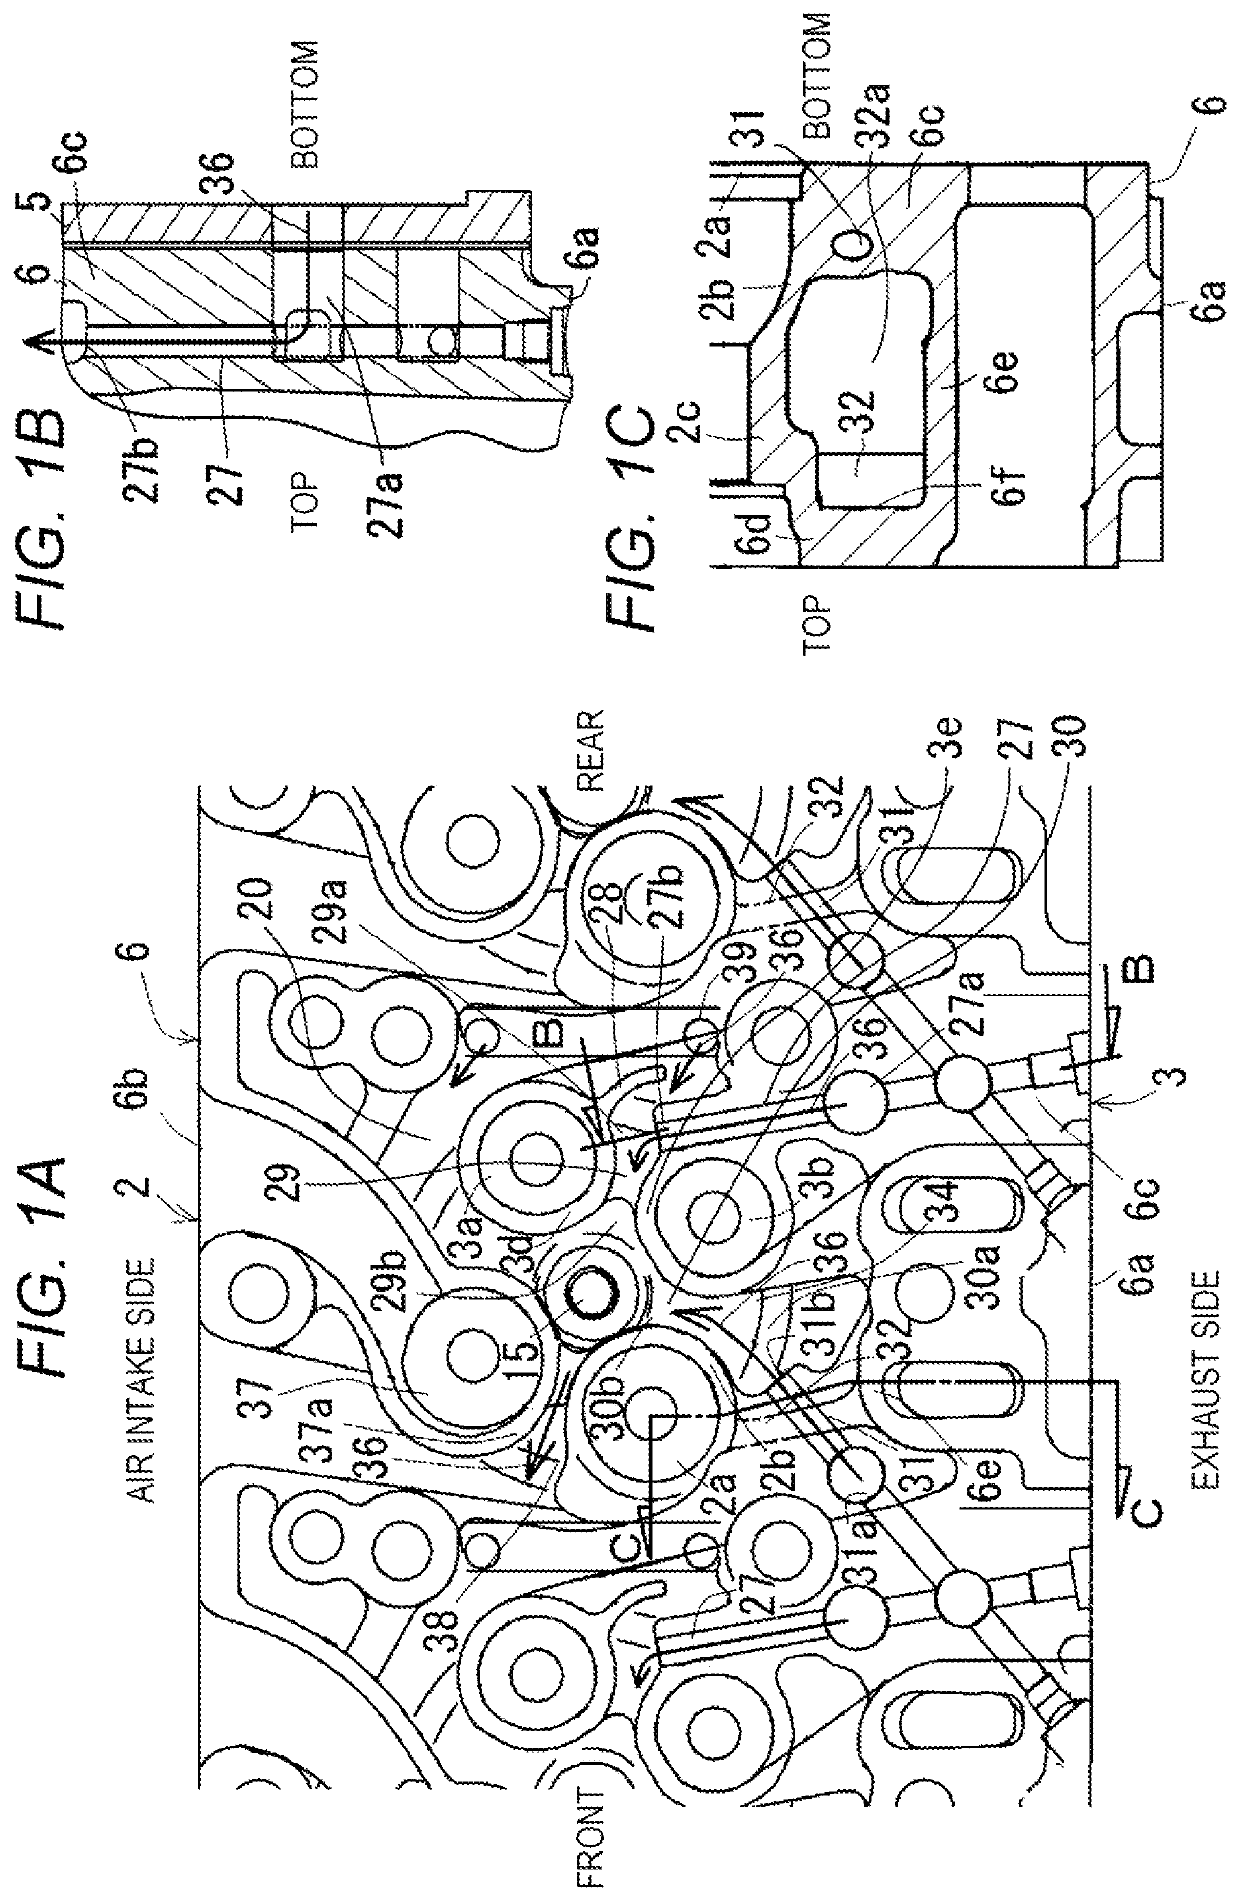 Water cooled engine